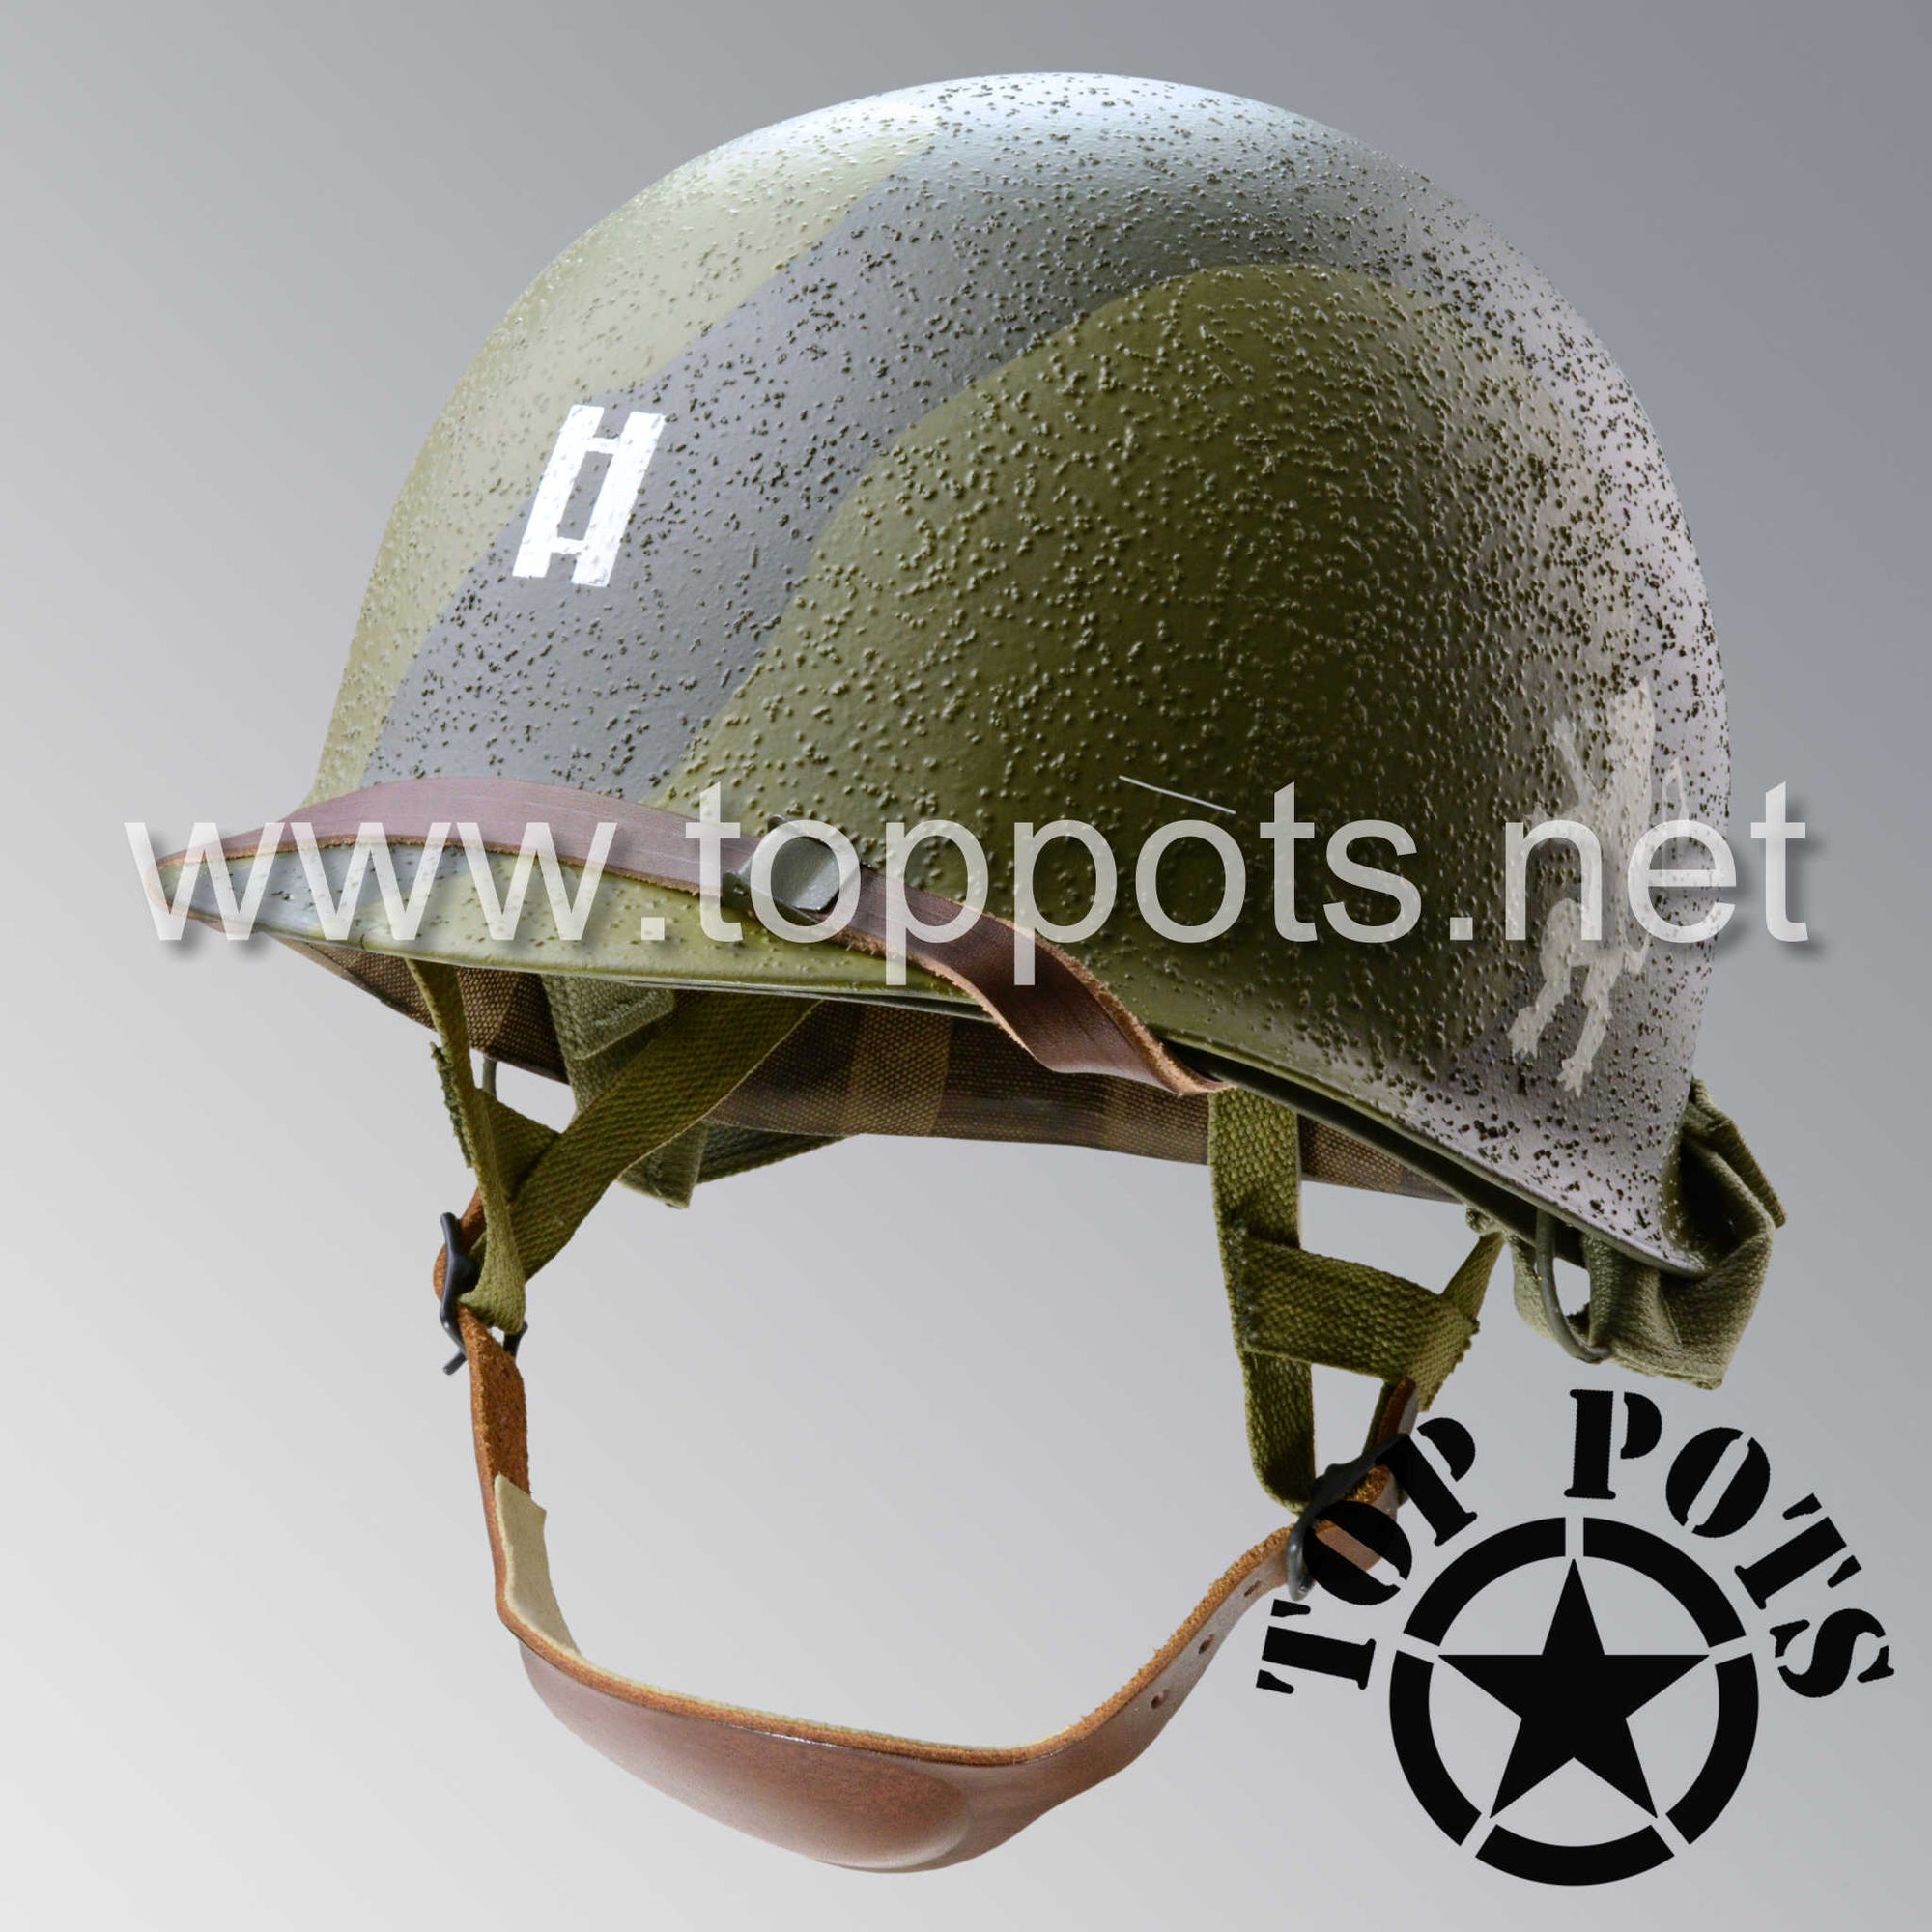 WWII US Army Restored Original M2 Paratrooper Airborne Helmet D Bale Shell and Liner with 505th PIR Officer Pathfinder Camouflage Emblem